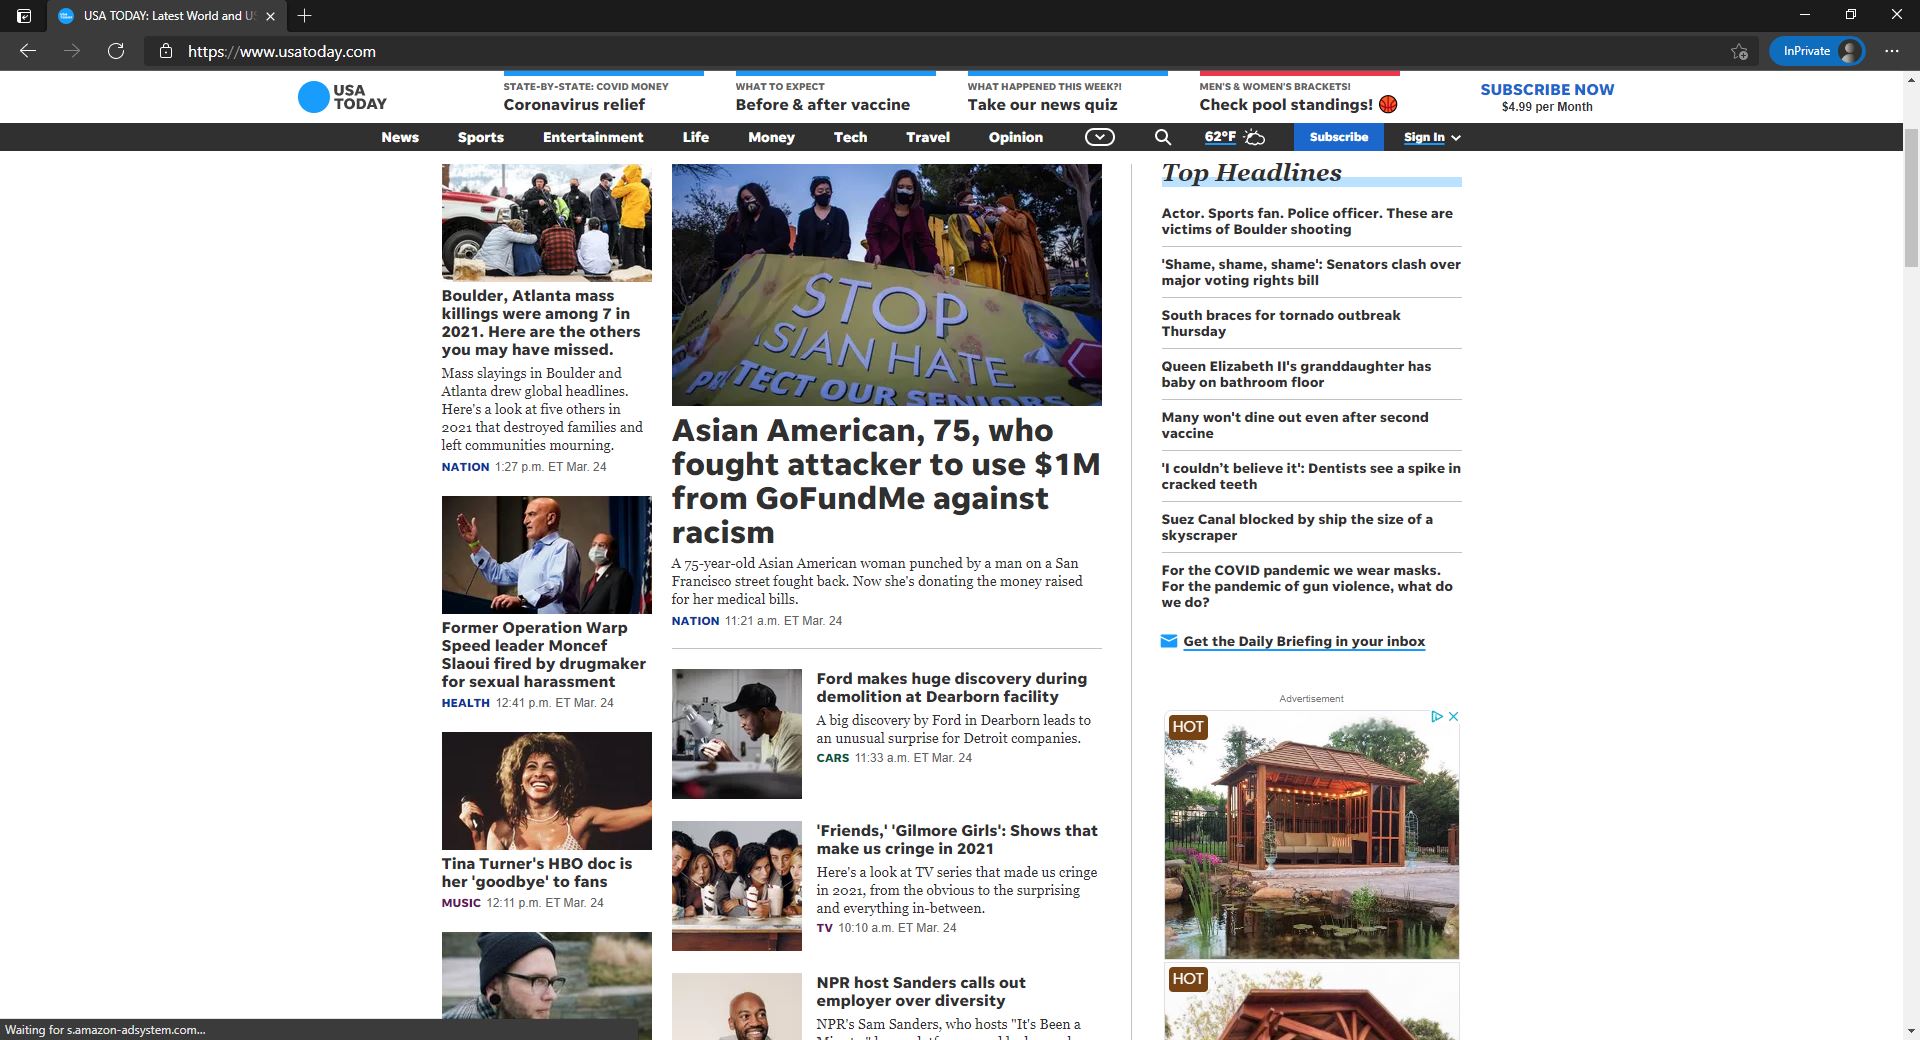 USA Today website homepage